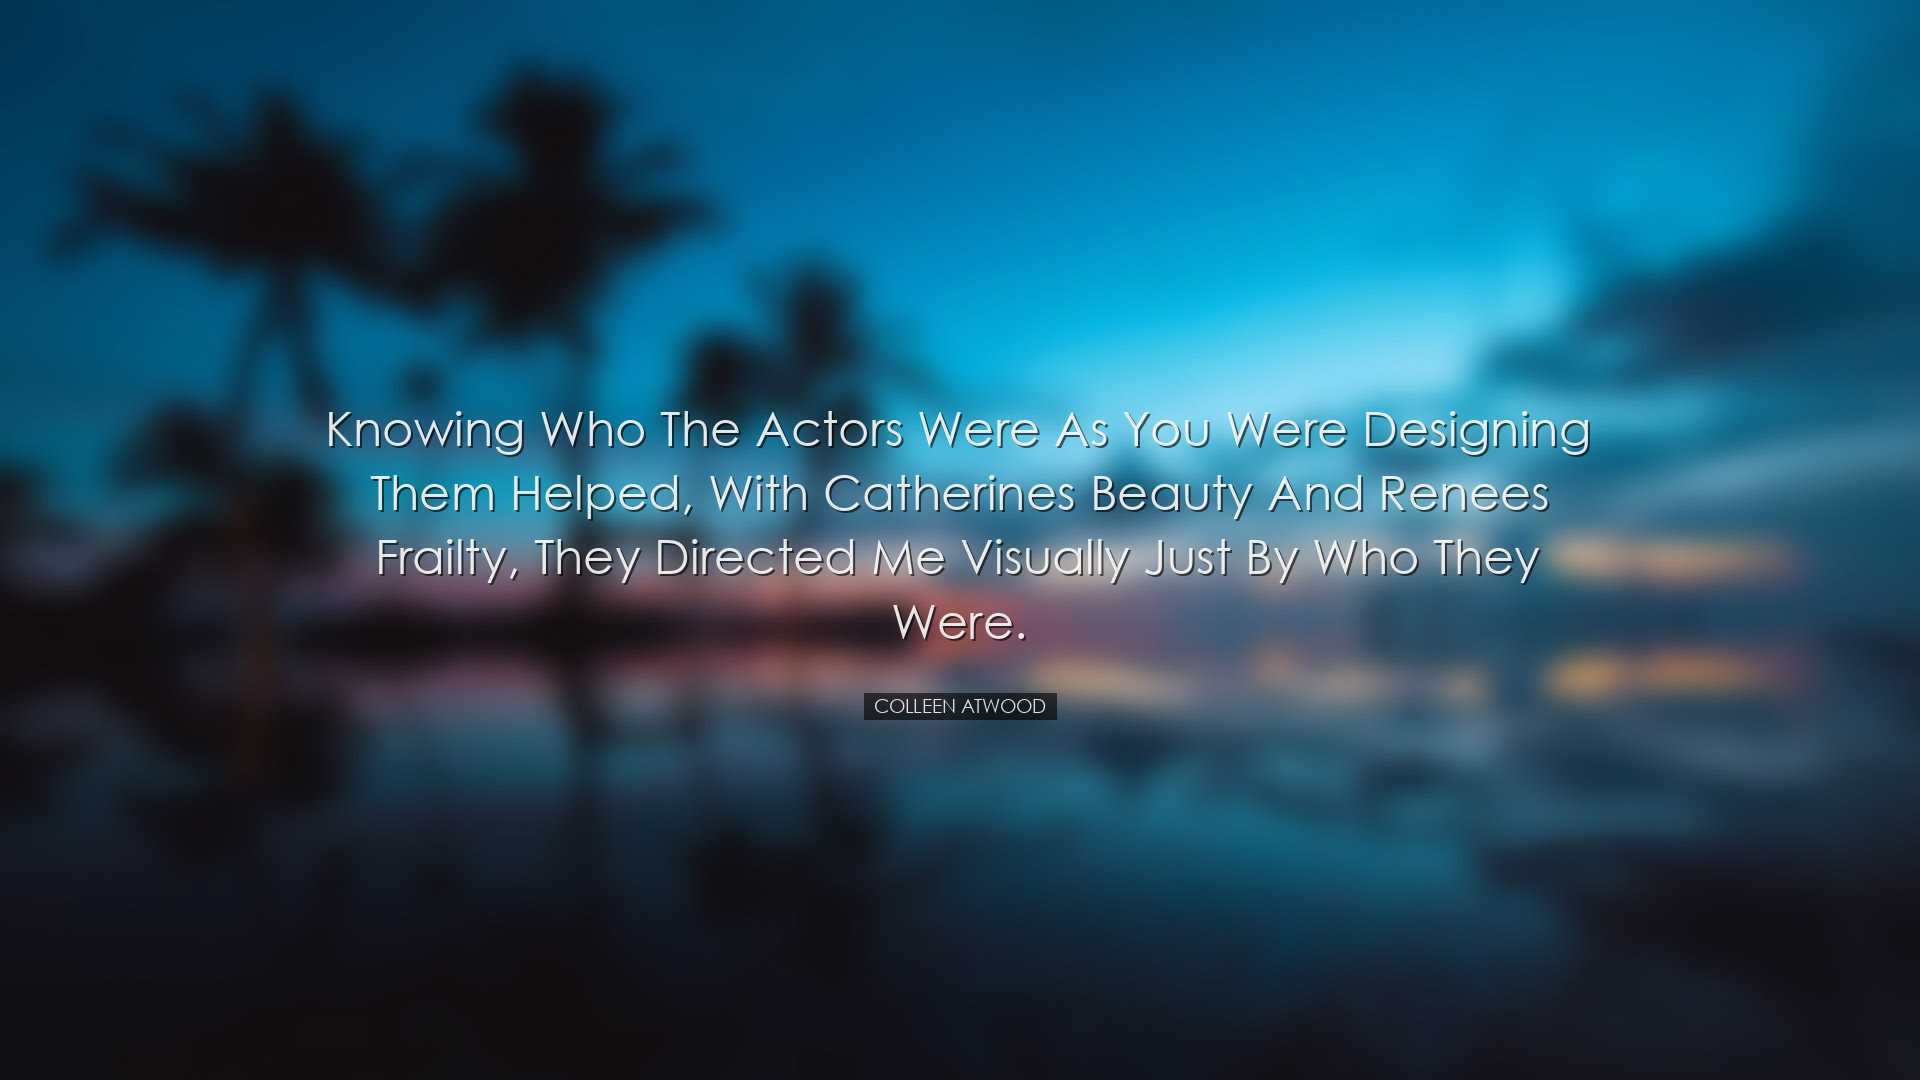 Knowing who the actors were as you were designing them helped, wit